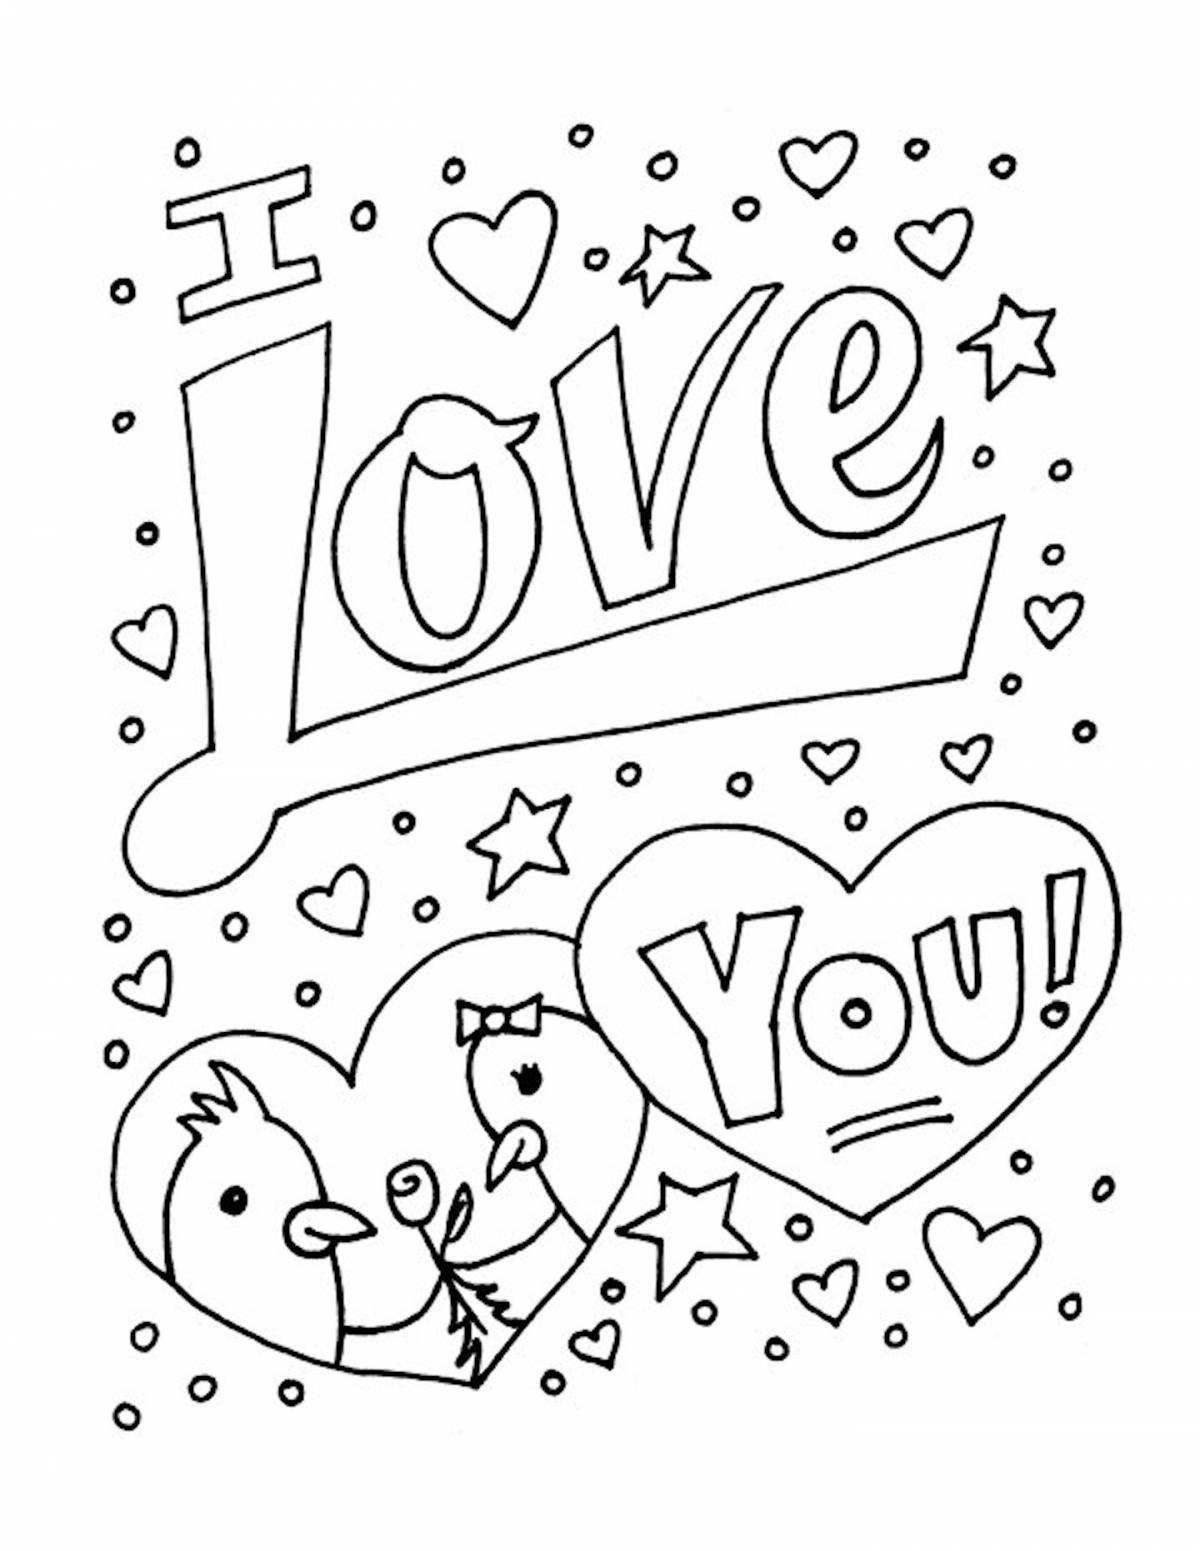 Exquisite coloring page 18